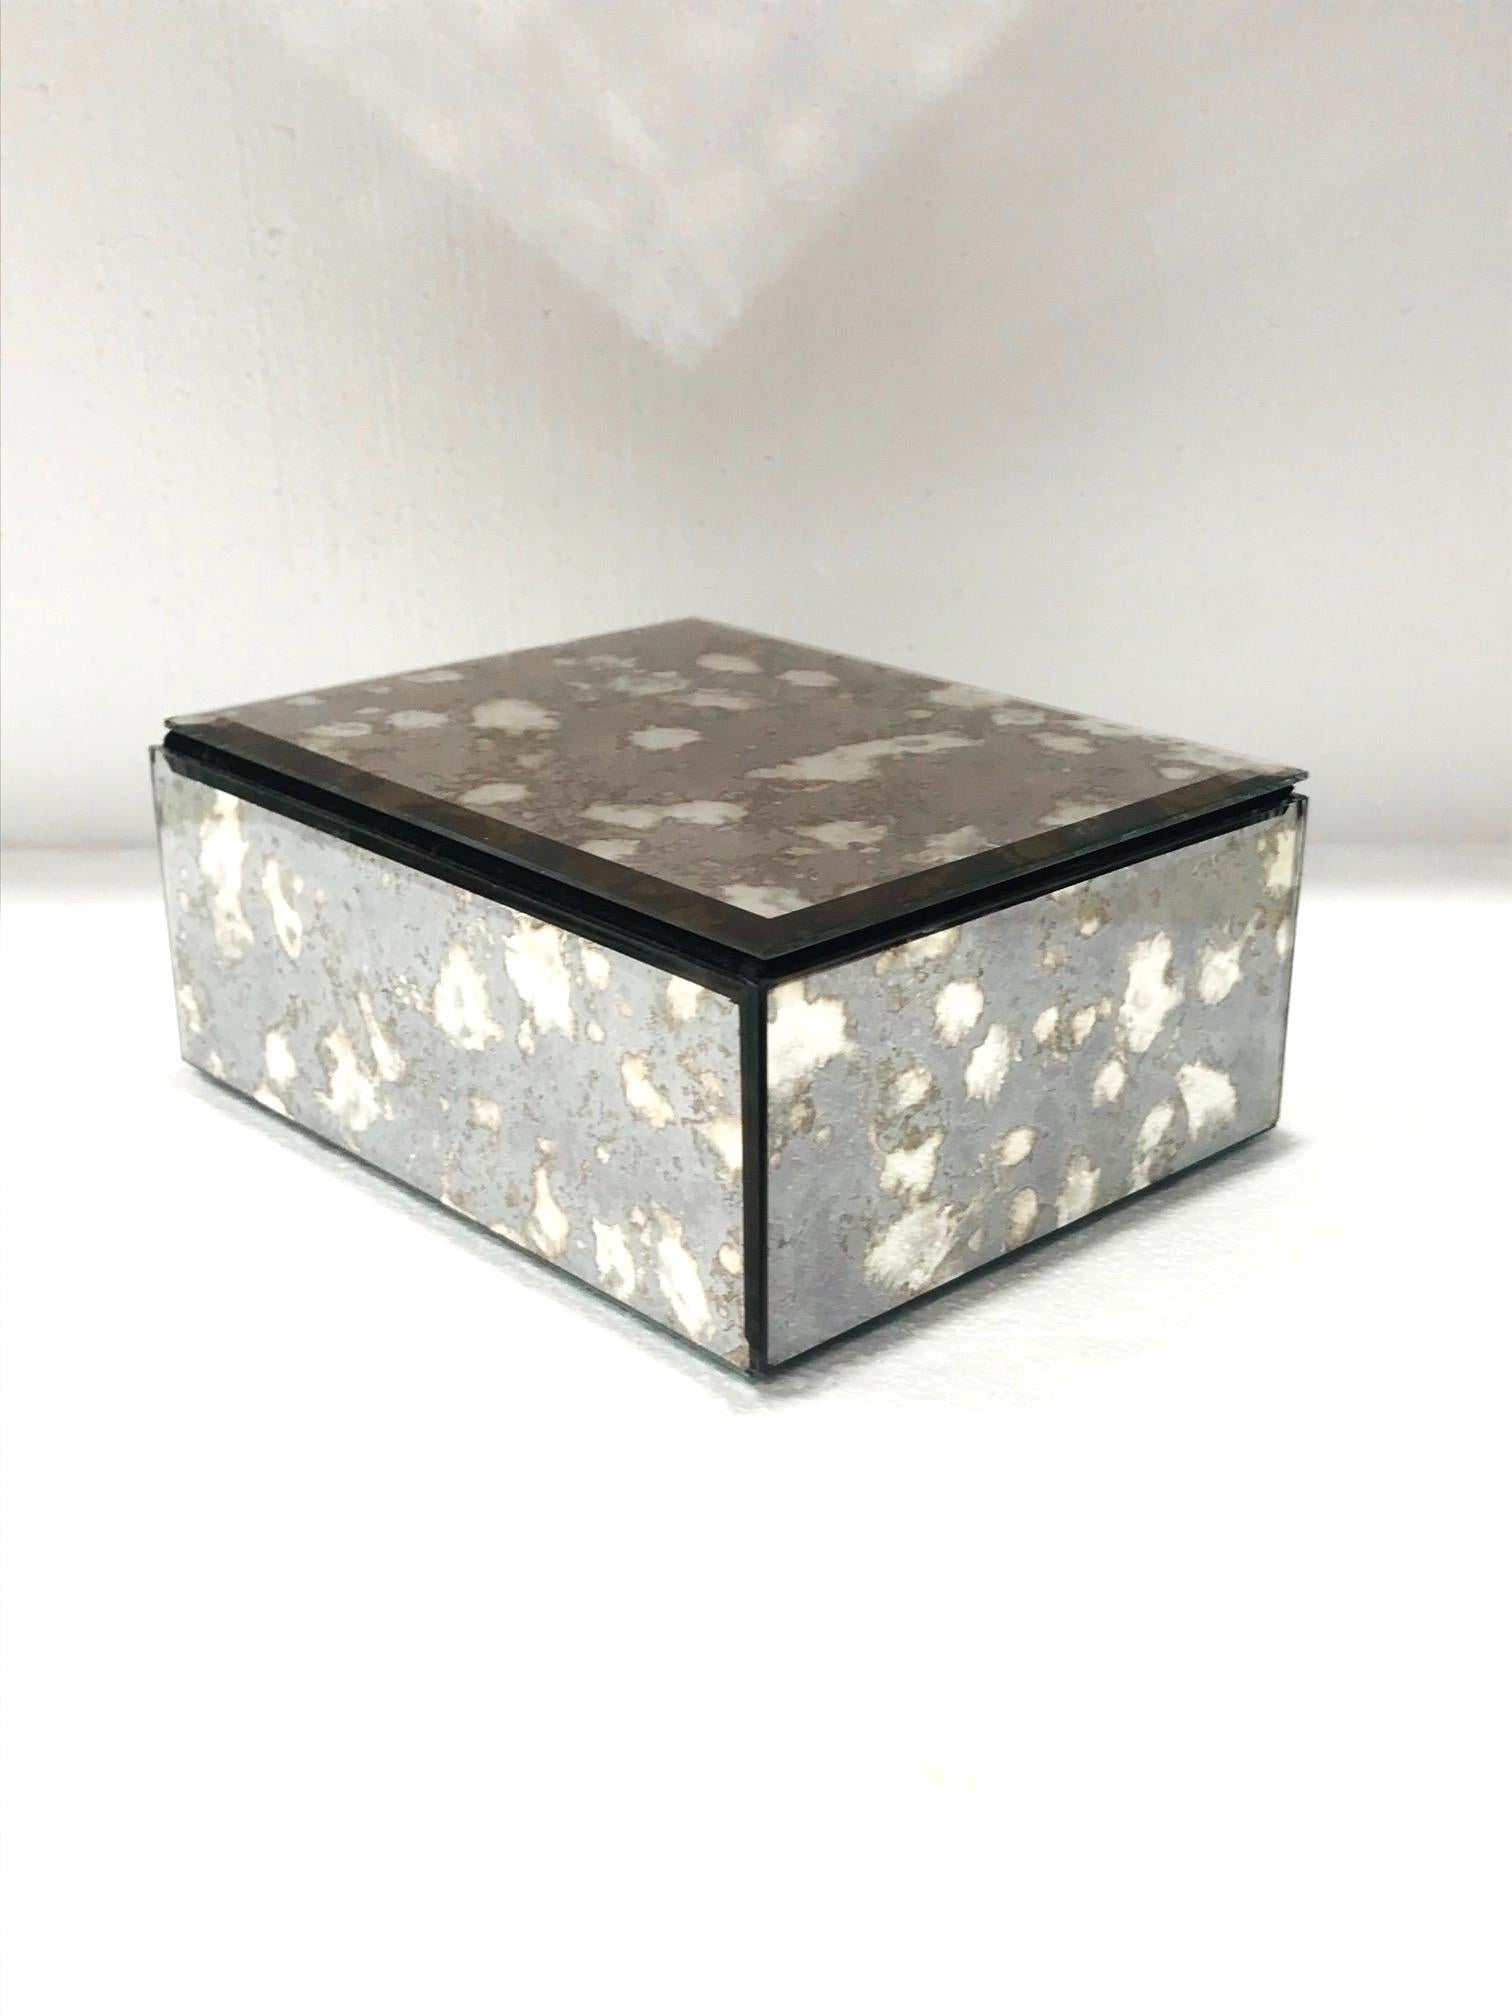 Vintage Hollywood Regency decorative box. The mirrored box captures the beautiful gradient movement of agate stone with antique spotted glass in hues of grey and bronze. The box features beveled edges with a hinged lid and a black felt interior and